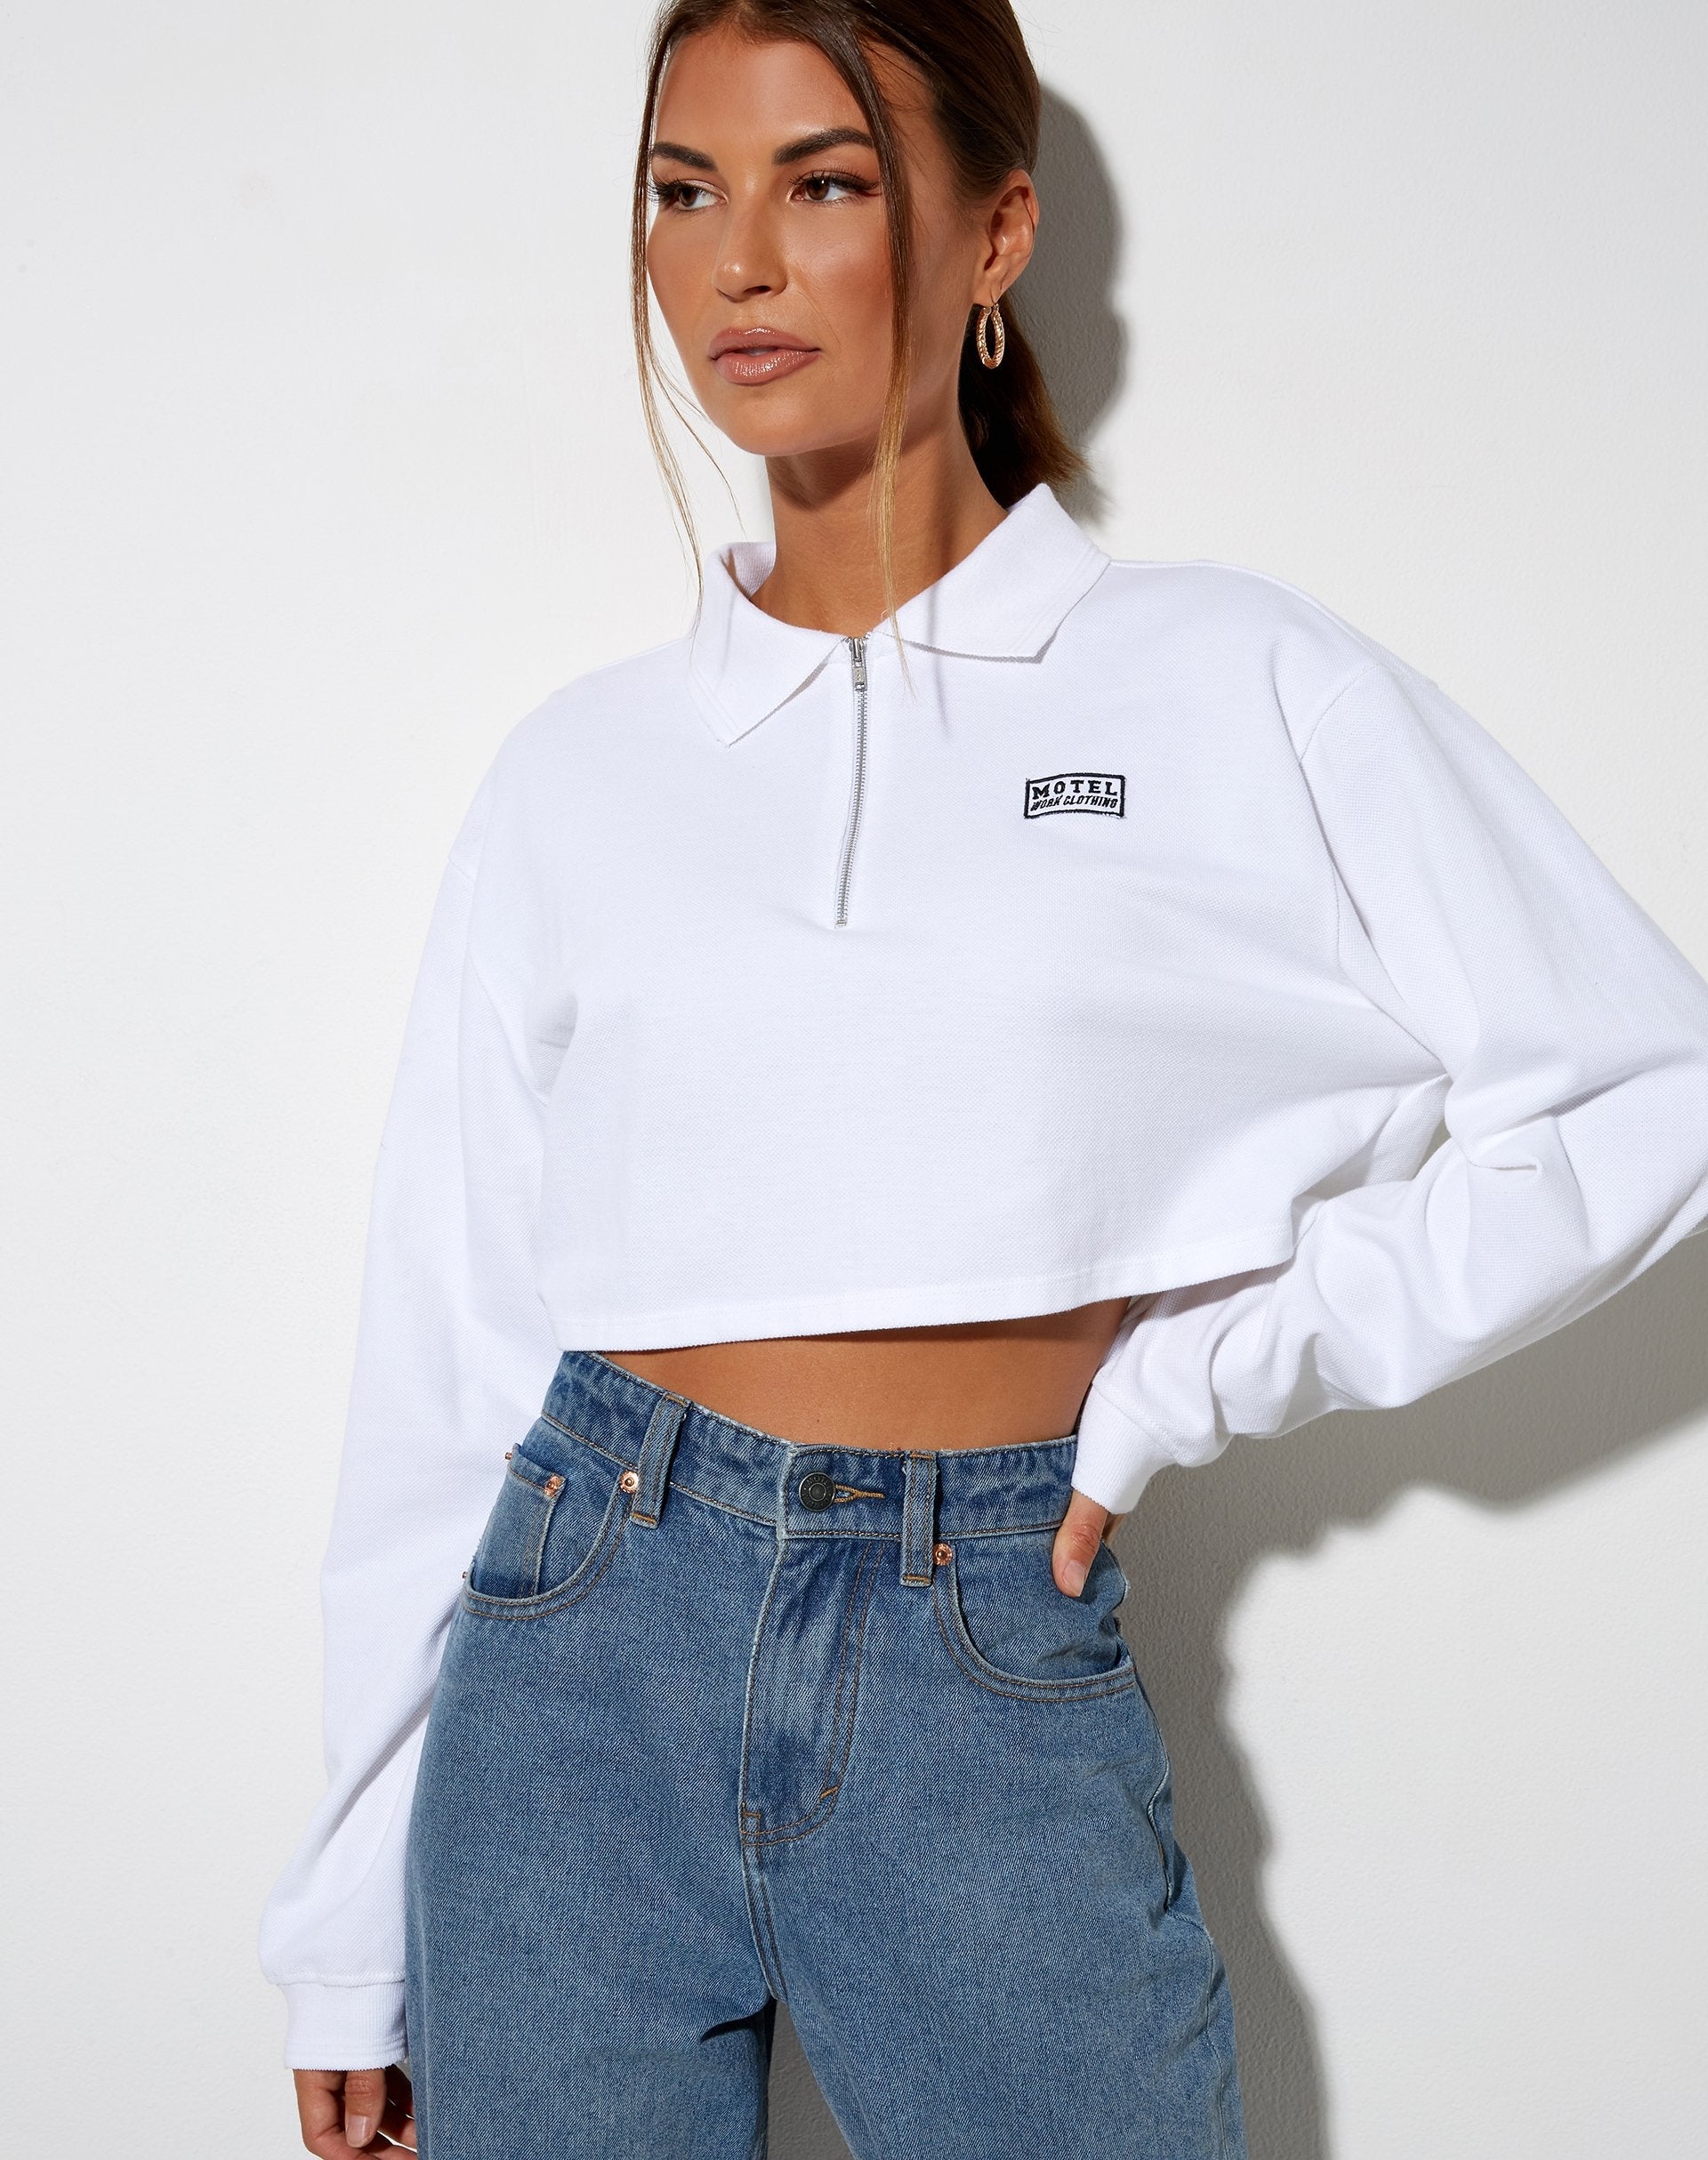 Gandi Crop Top in White with Motel Work Clothing Label